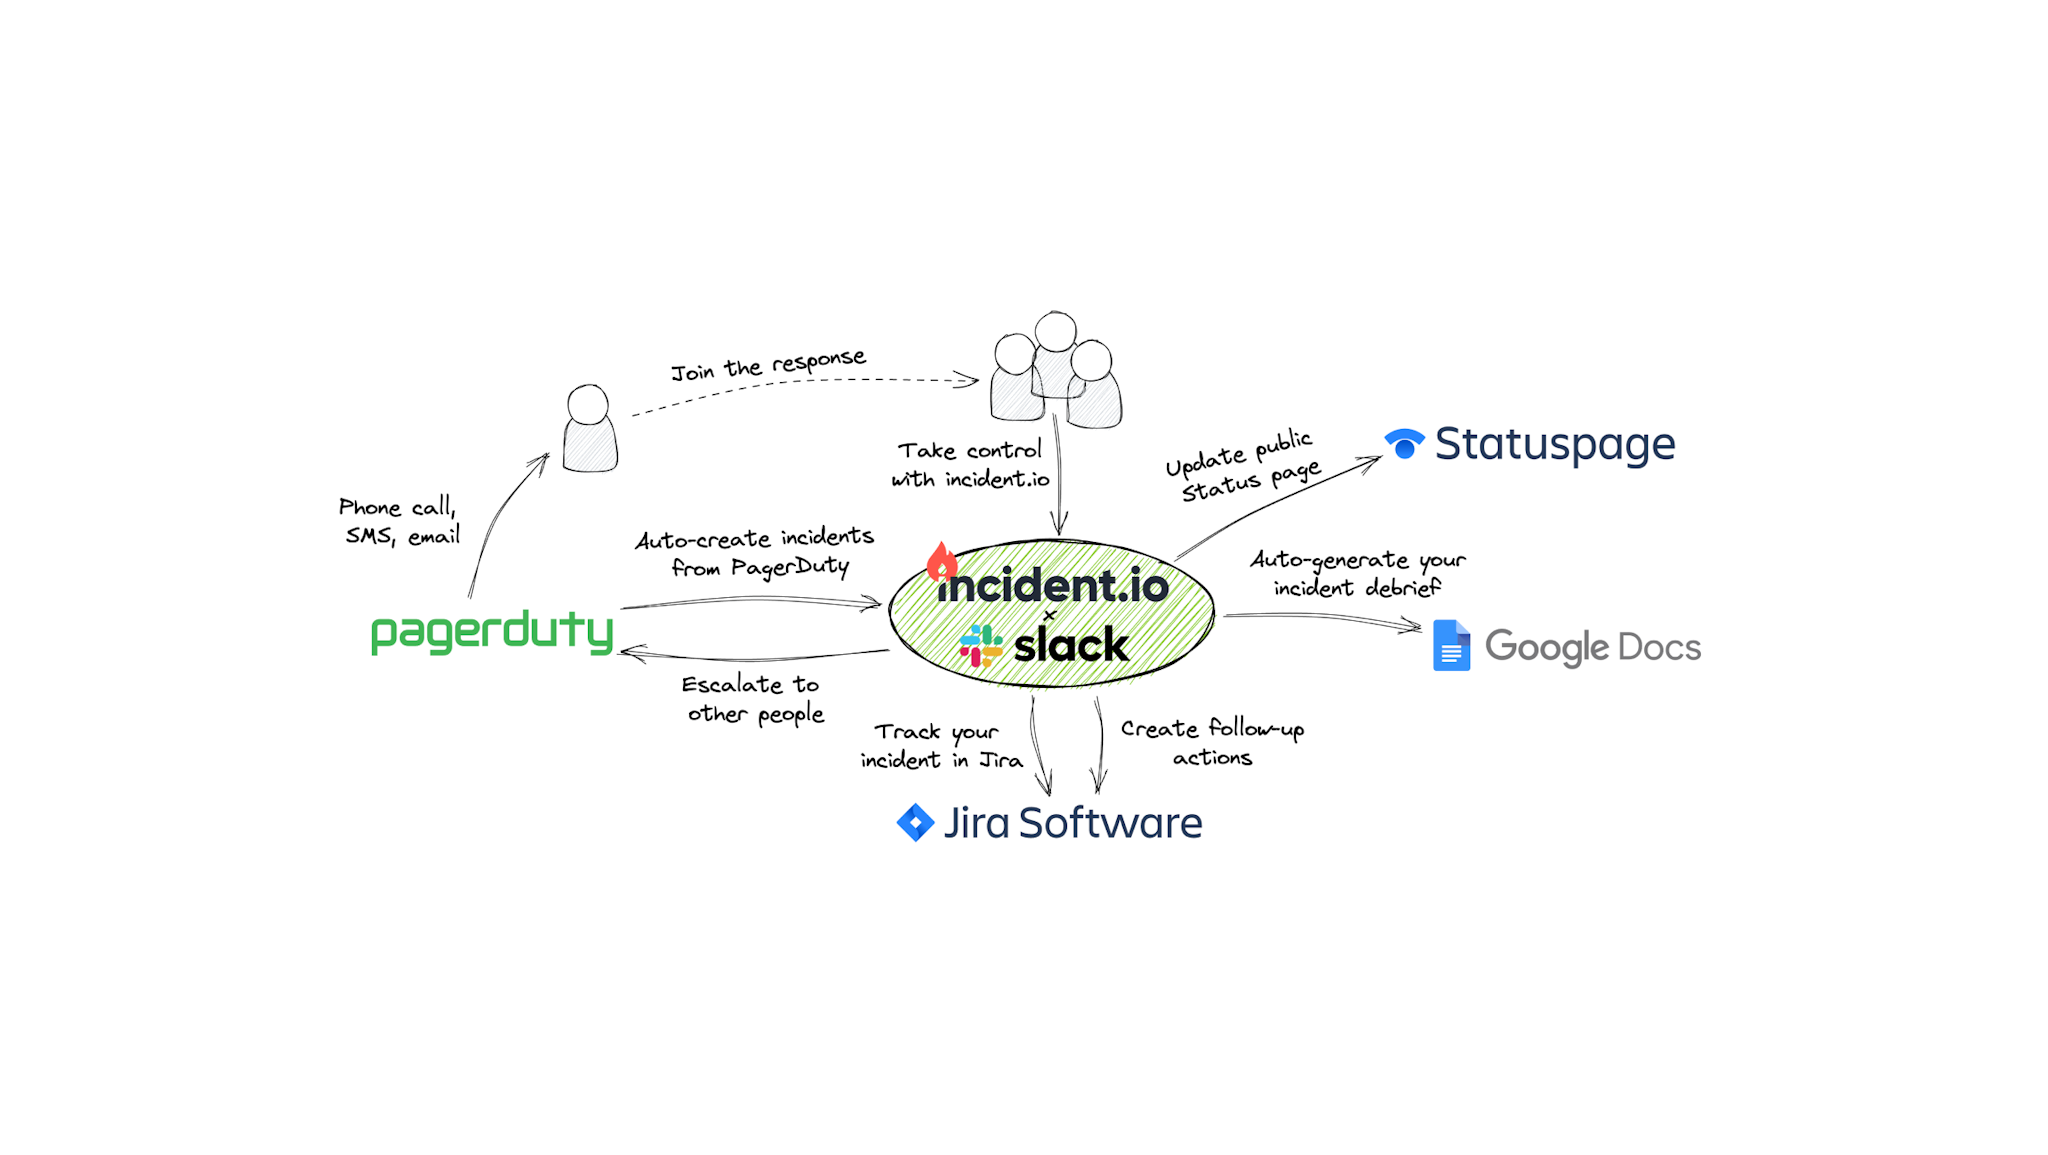 Scribe - PagerDuty Incident Response Documentation